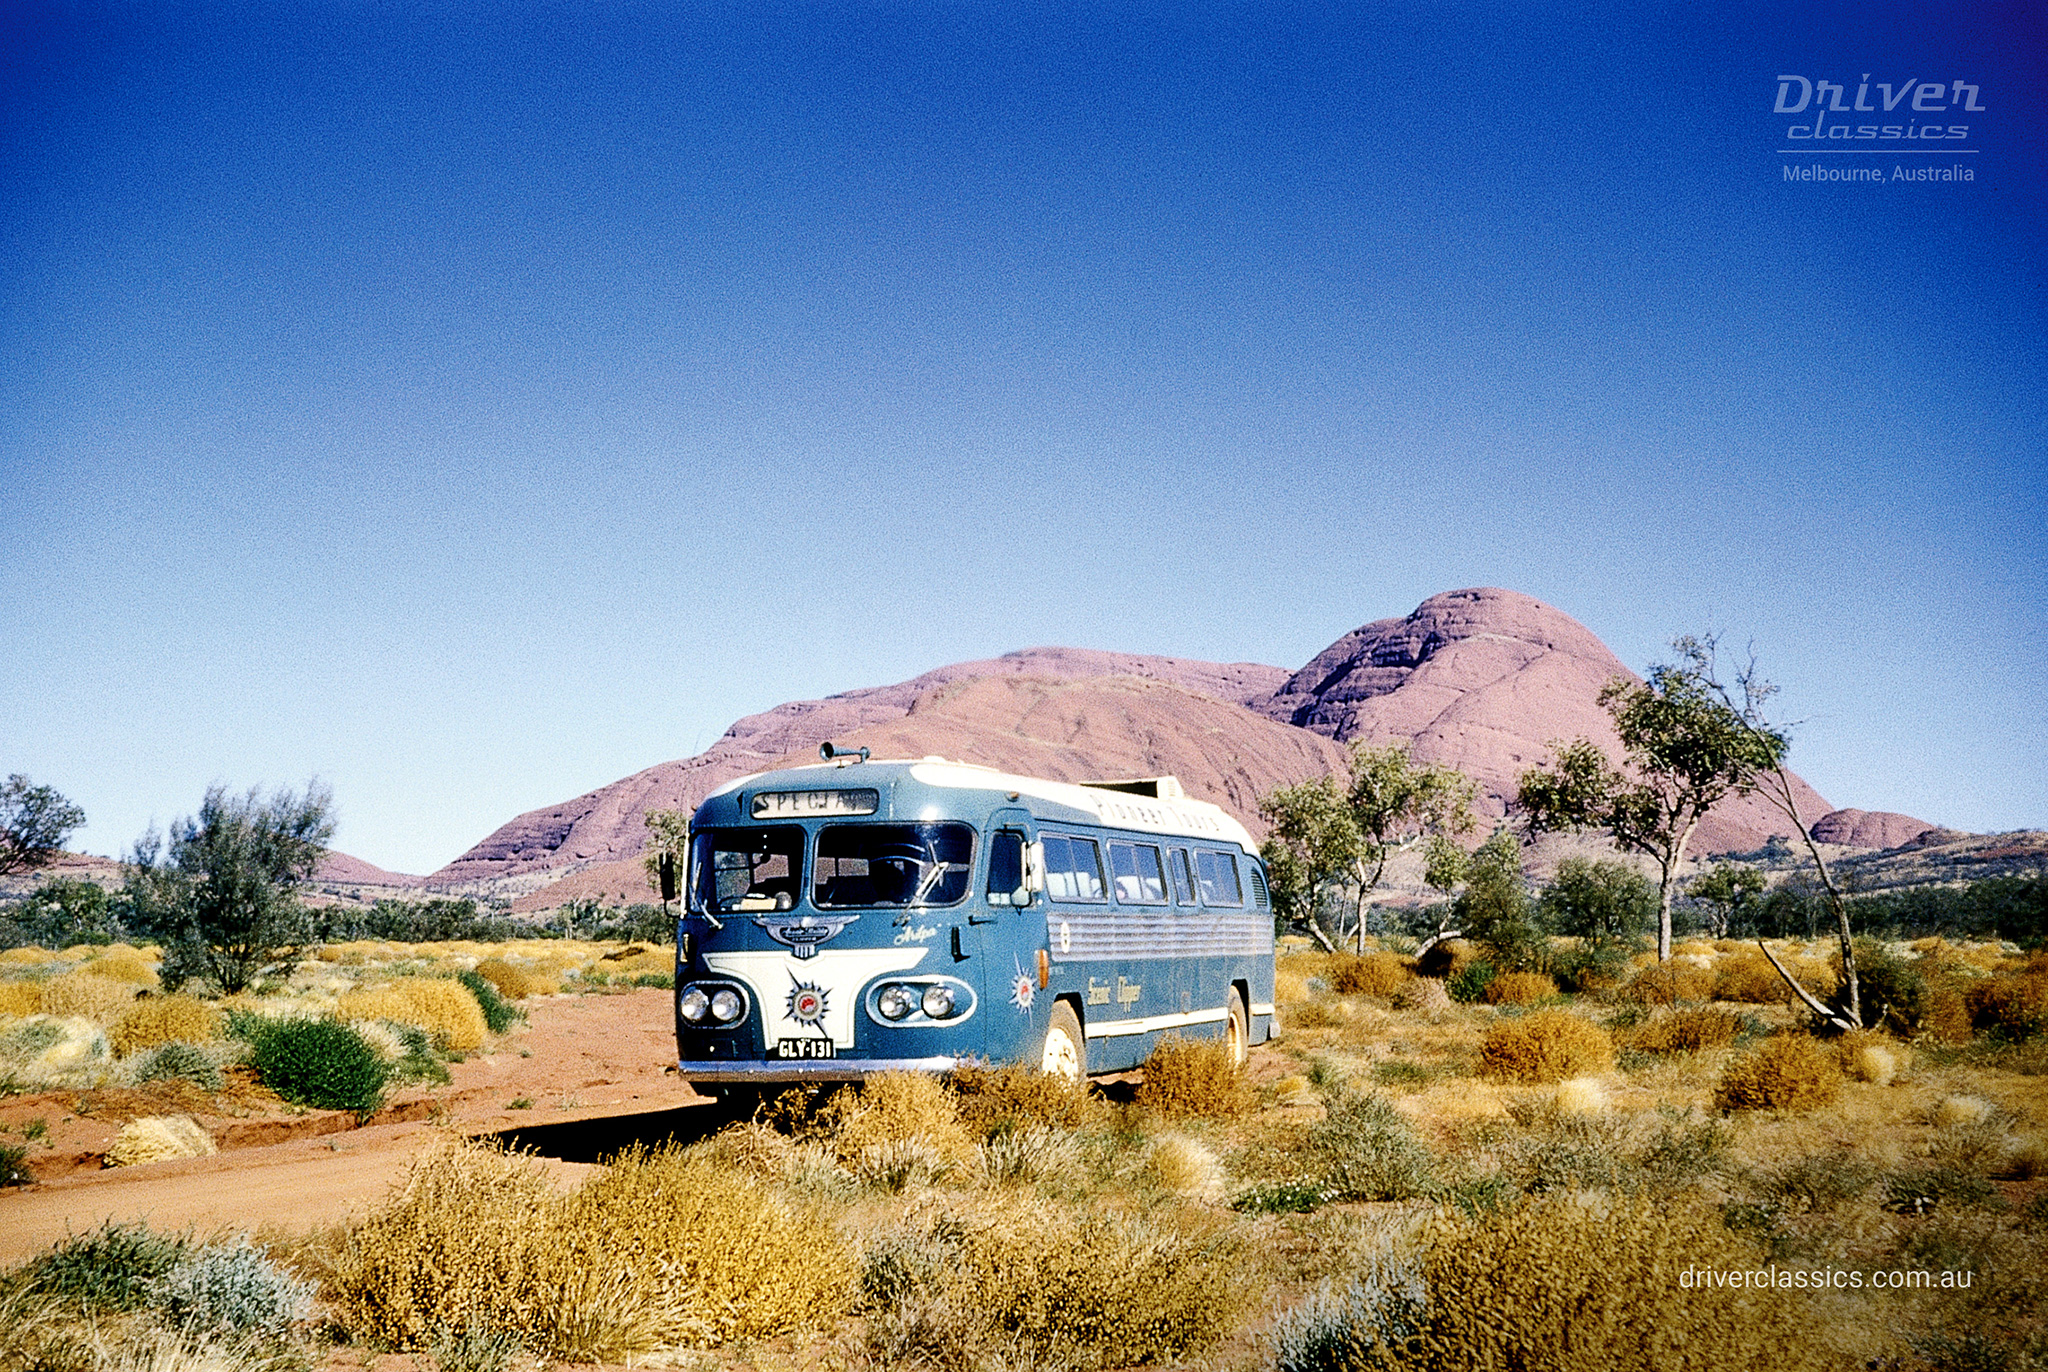 Ansair Flxible Clipper bus (1956 model), at the Olgas Northern Territory Australia, photo taken late 1960s by Graeme Phillips